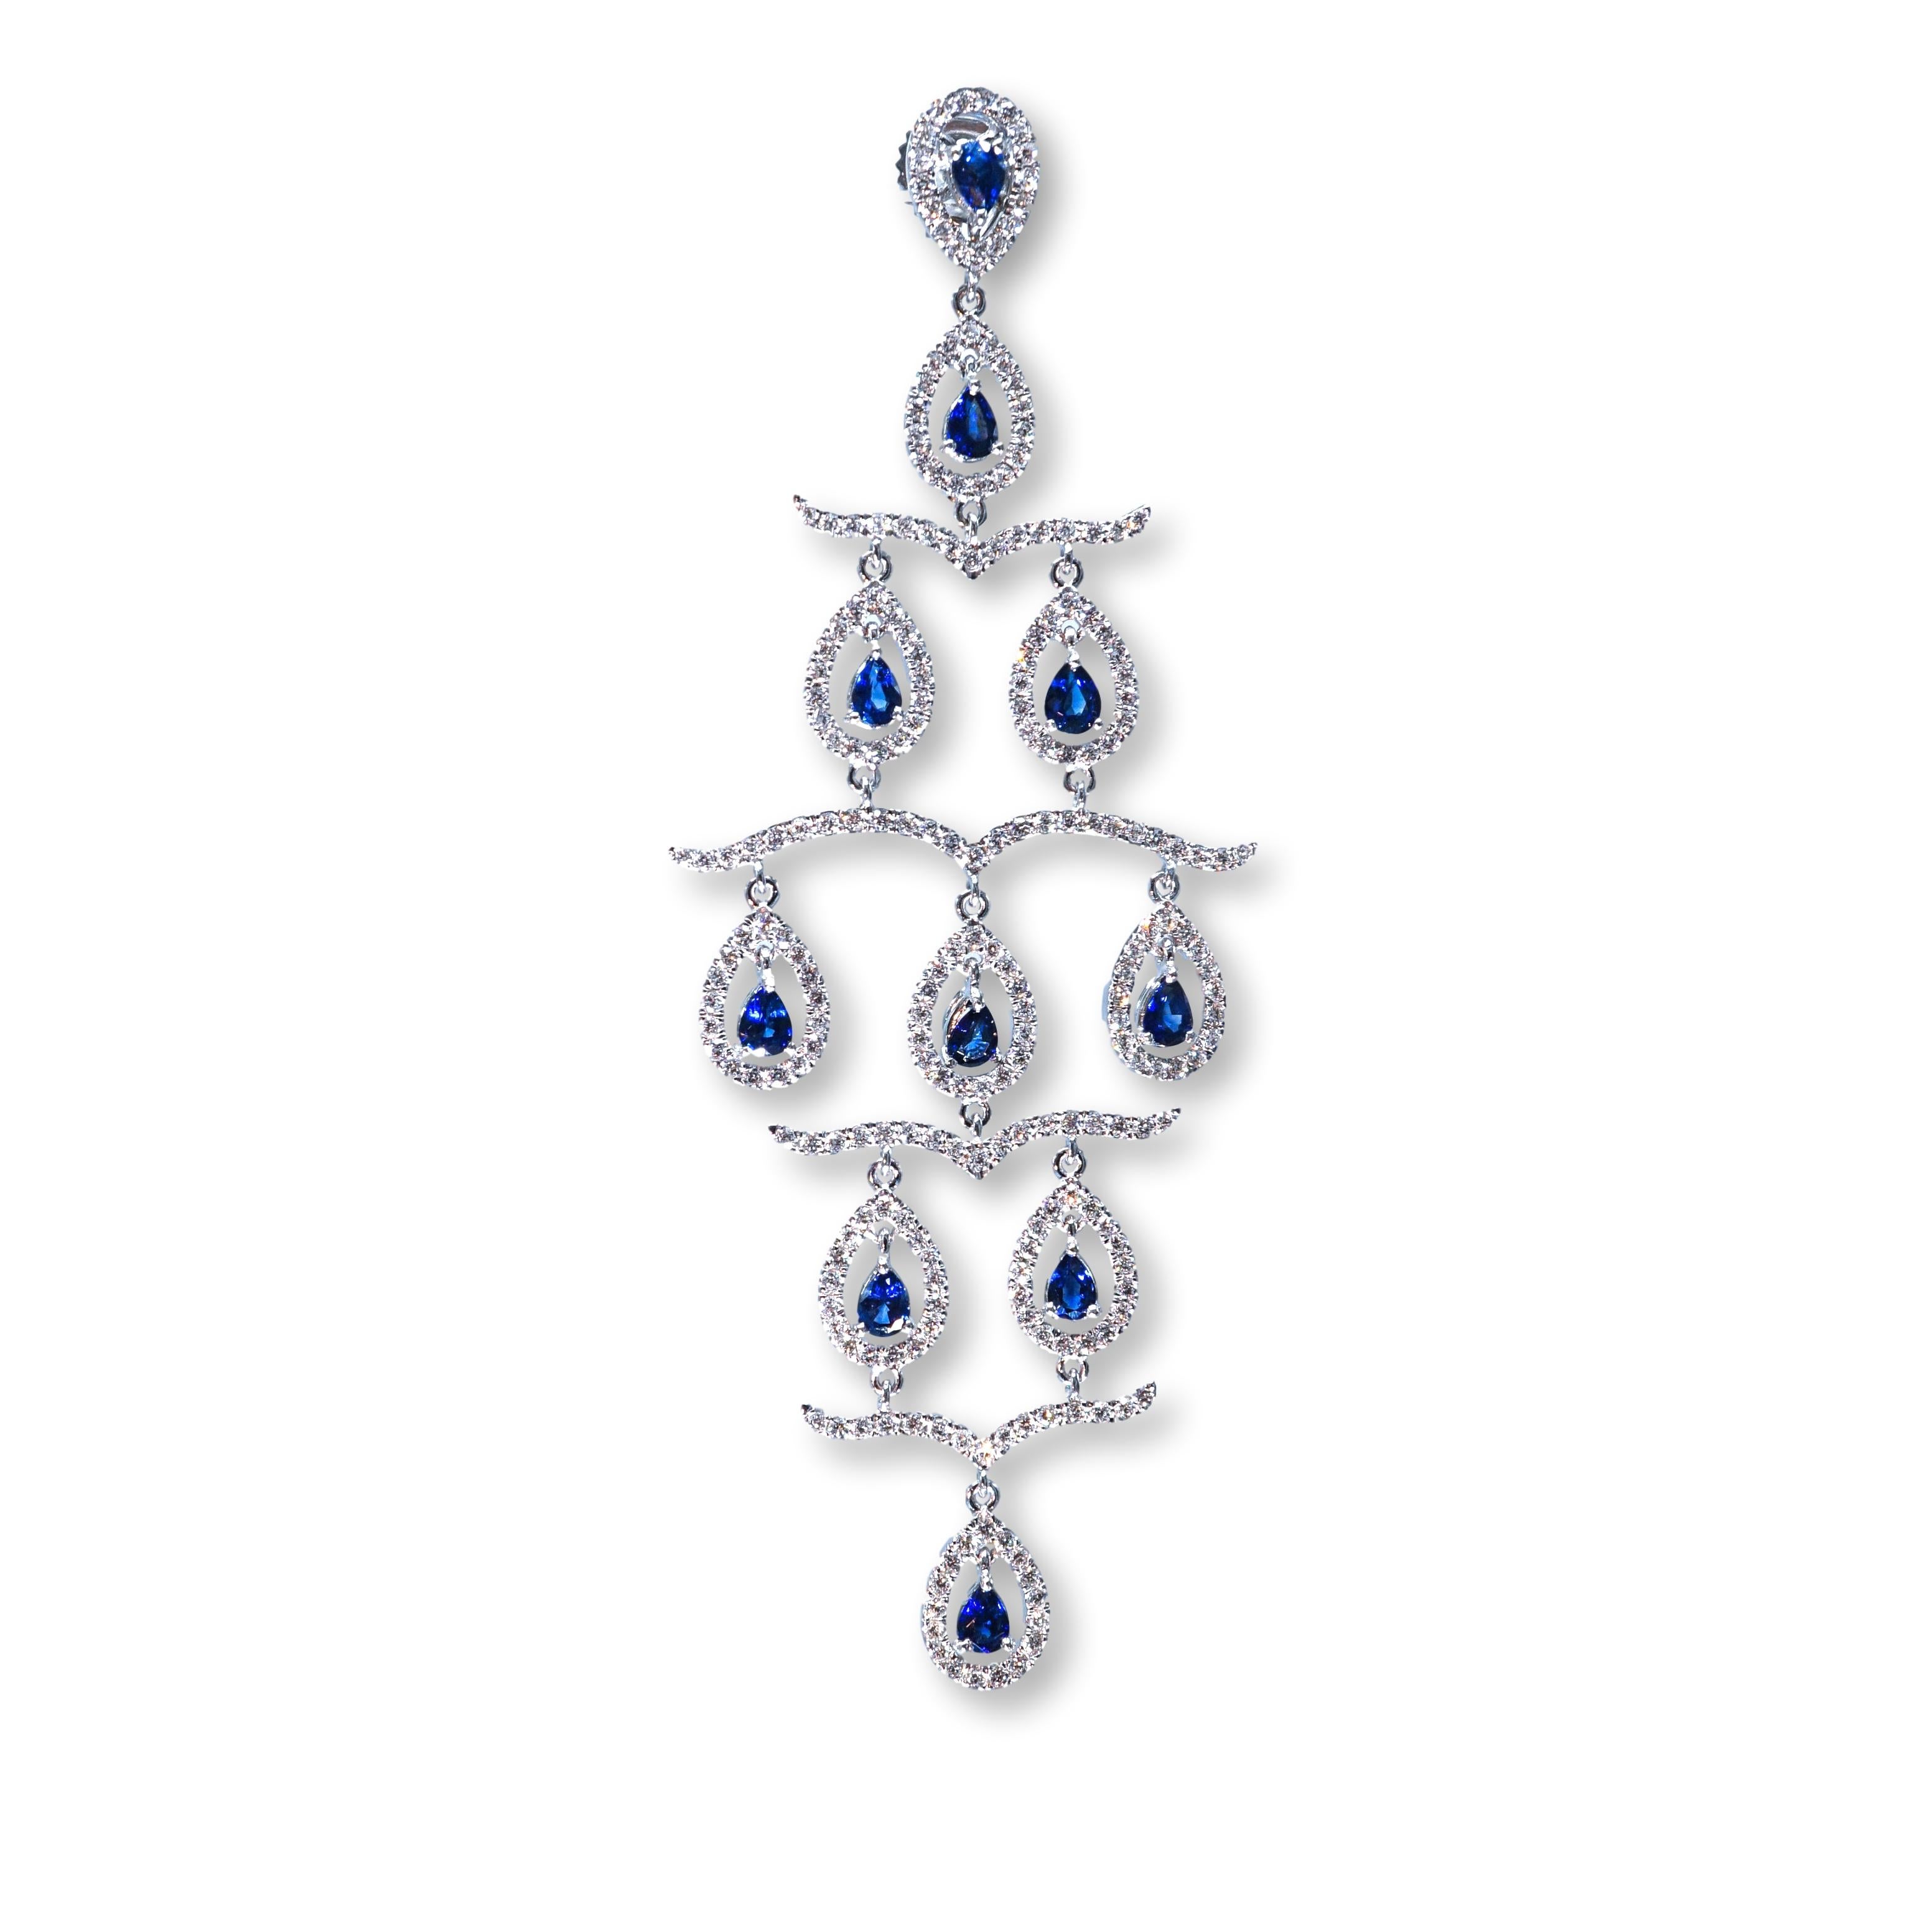 Contemporary 18 Karat White Gold Diamond, Sapphire and Gold Earrings For Sale